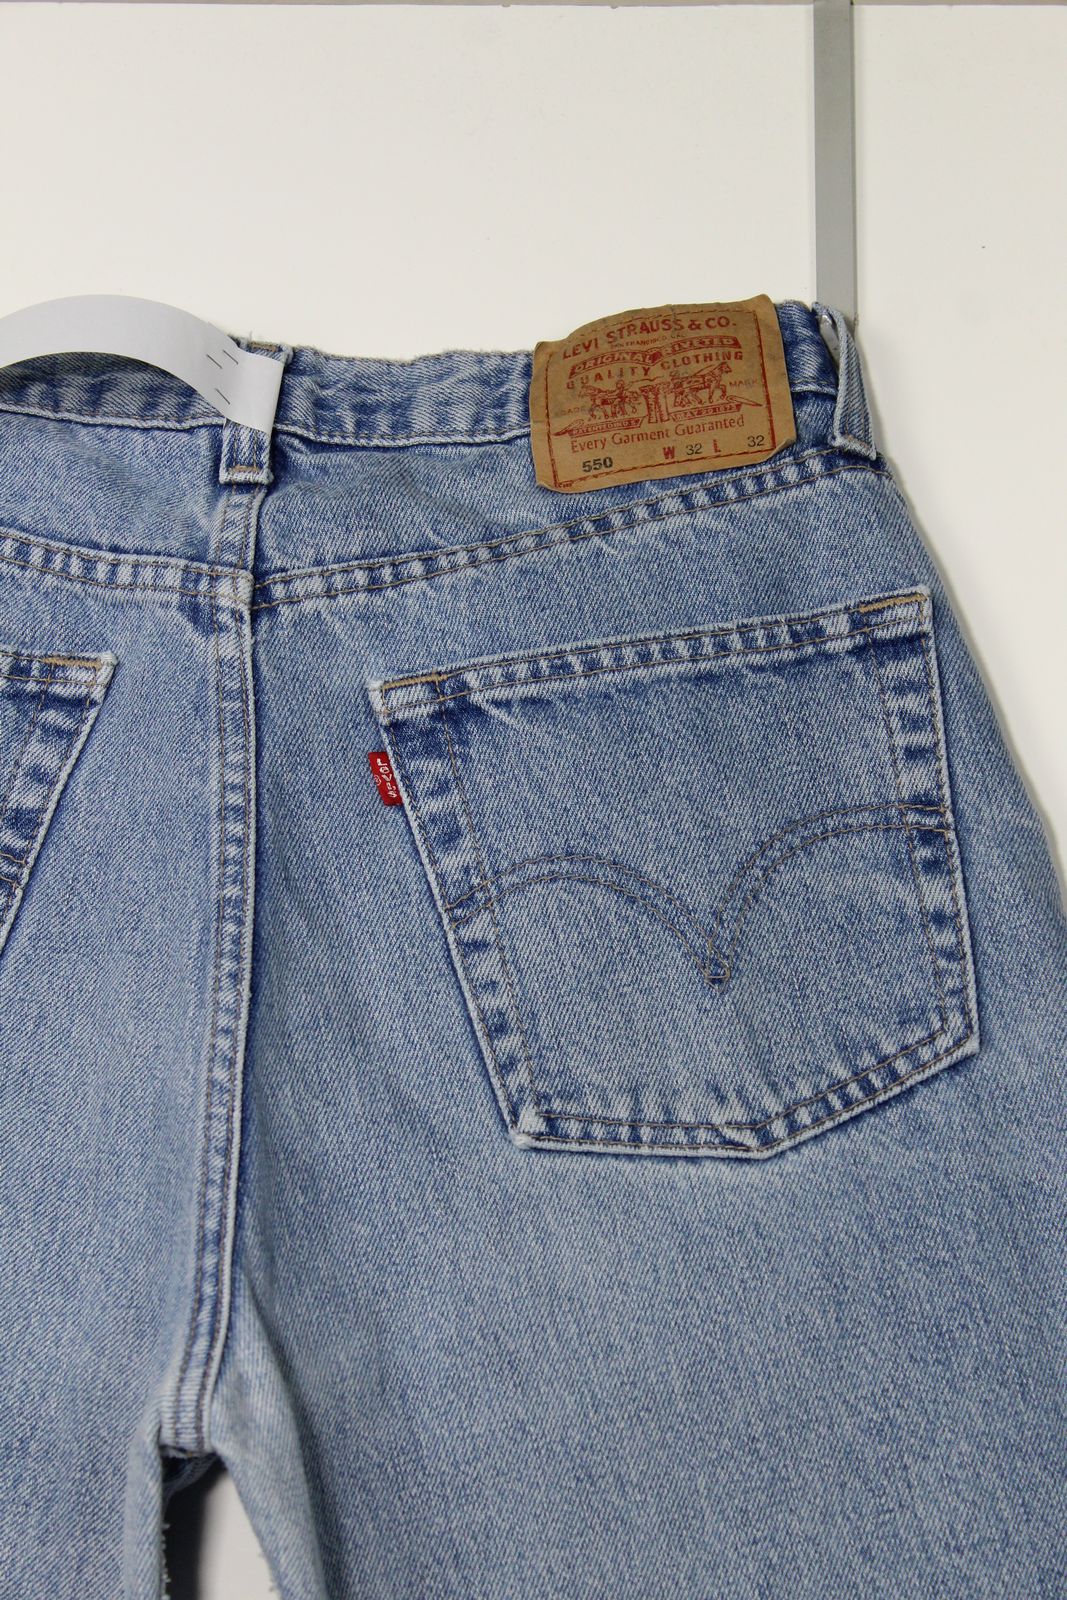 Levi's 550 Relaxed Fit Denim W32 L32 Made In USA Jeans Vintage